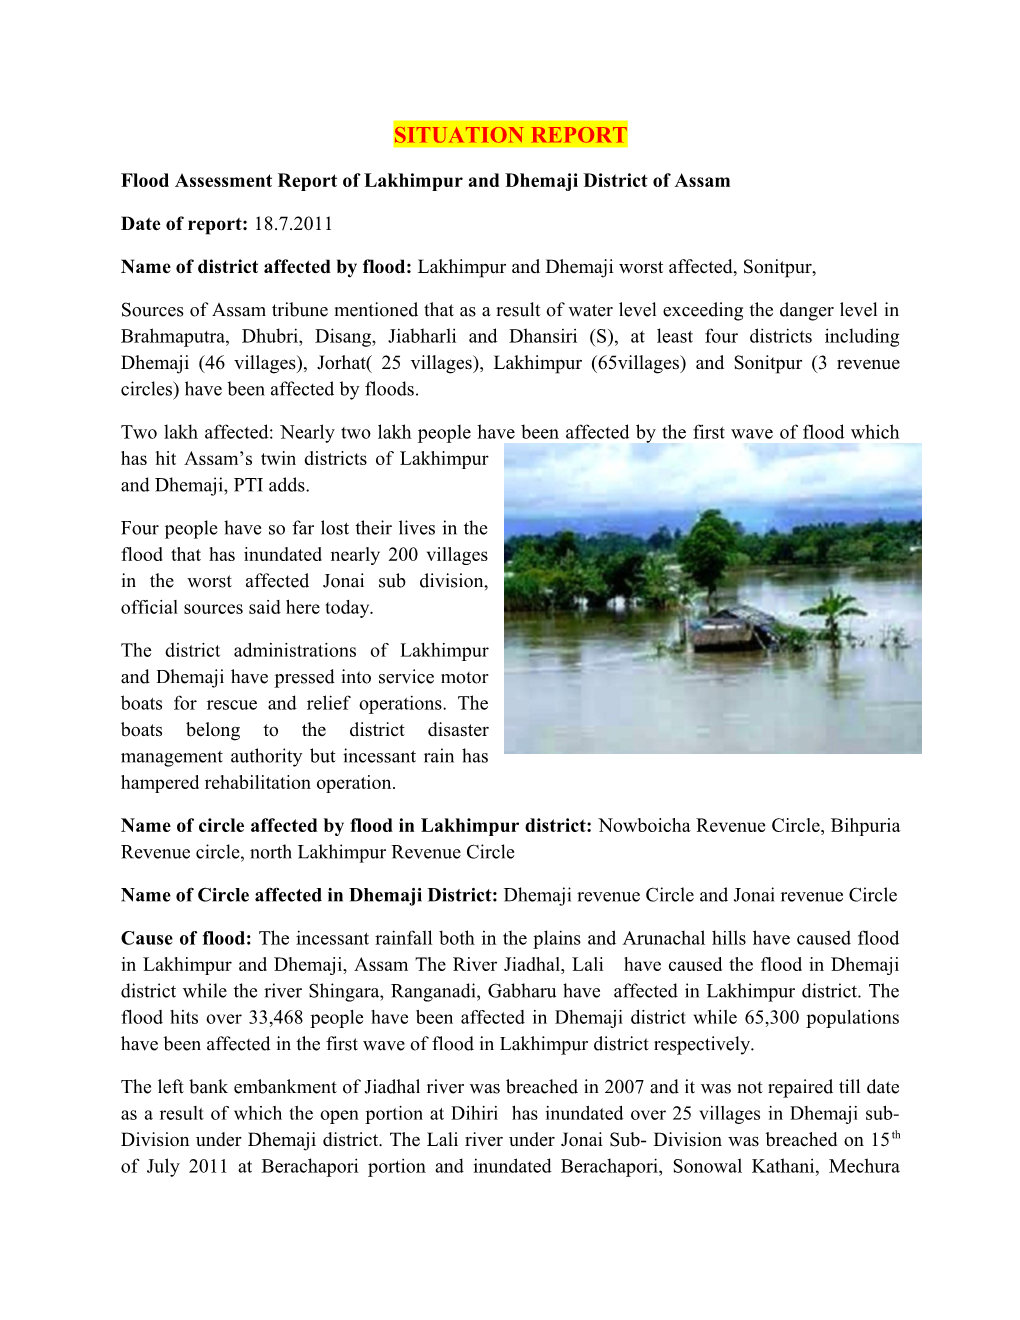 Flood Assessment Report of Lakhimpur and Dhemaji District of Assam